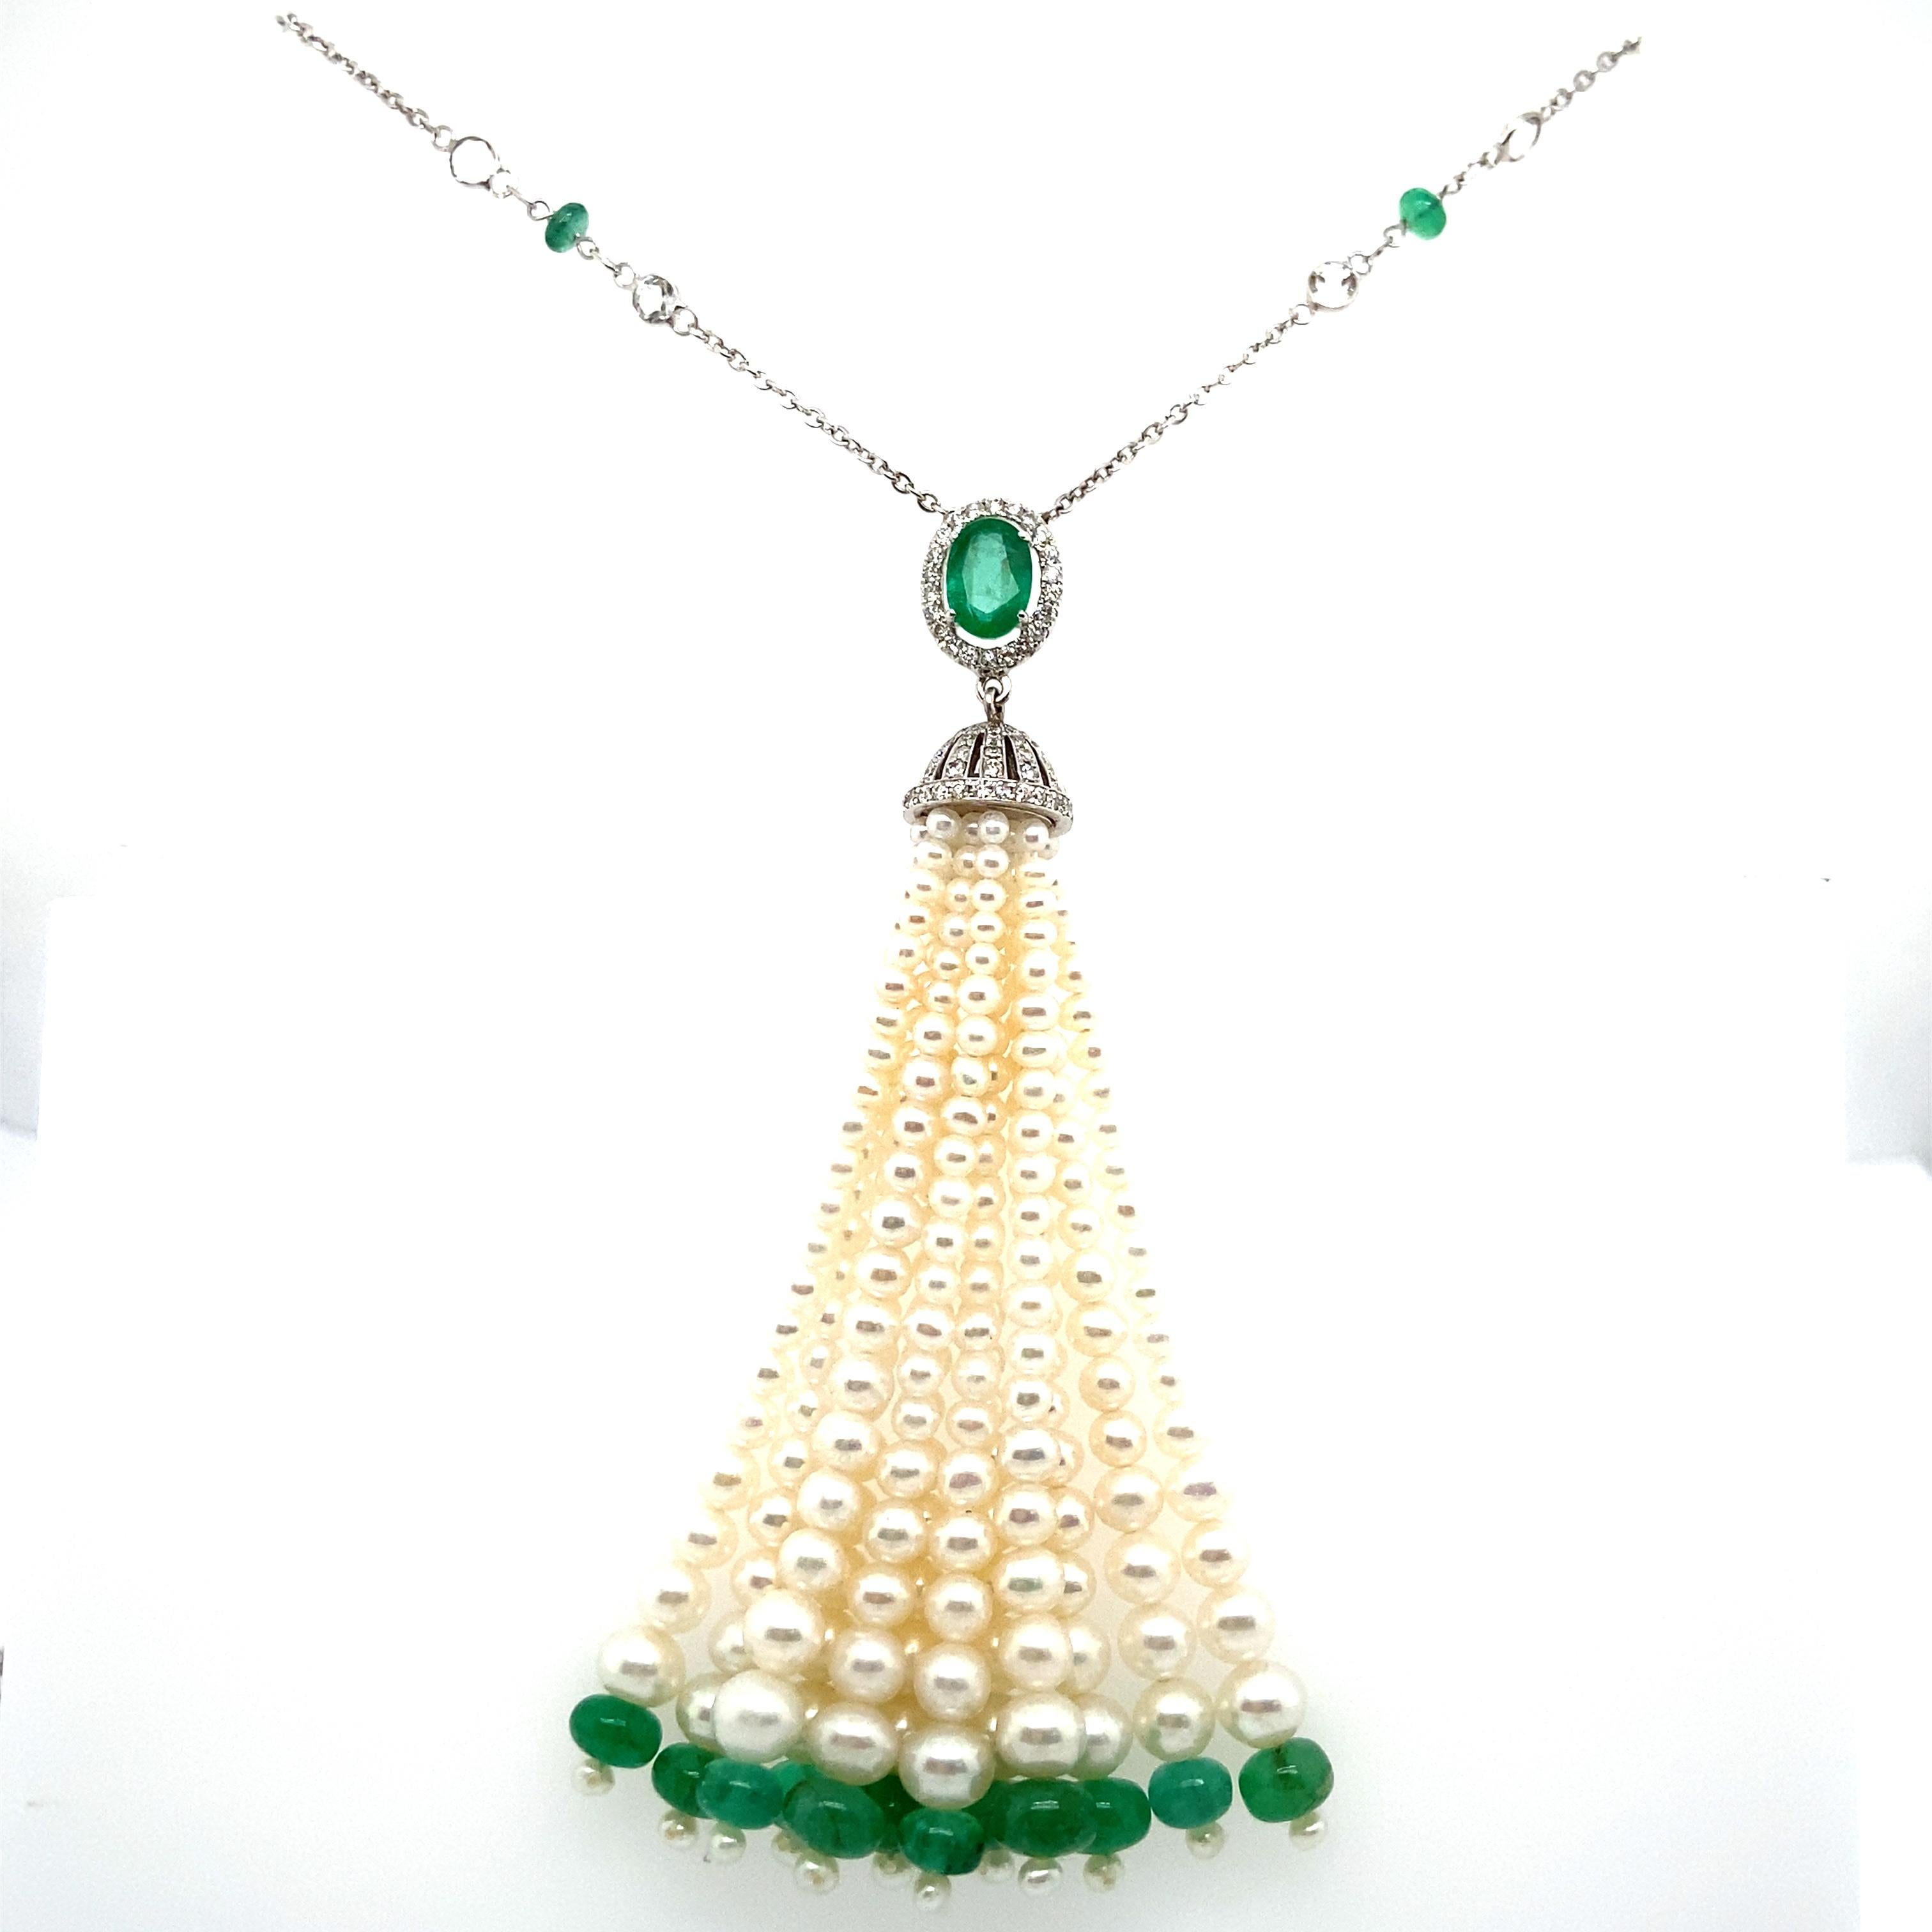 Oval-cut Emerald, Emerald Beads, Pearls, and White Diamond Gold Tassel Necklace:

An elegant tassel necklace, it features an oval-cut natural emerald weighing 2.74 carat, along with emerald beads weighing 13.20 carat, pearls weighing 10.52 carat,